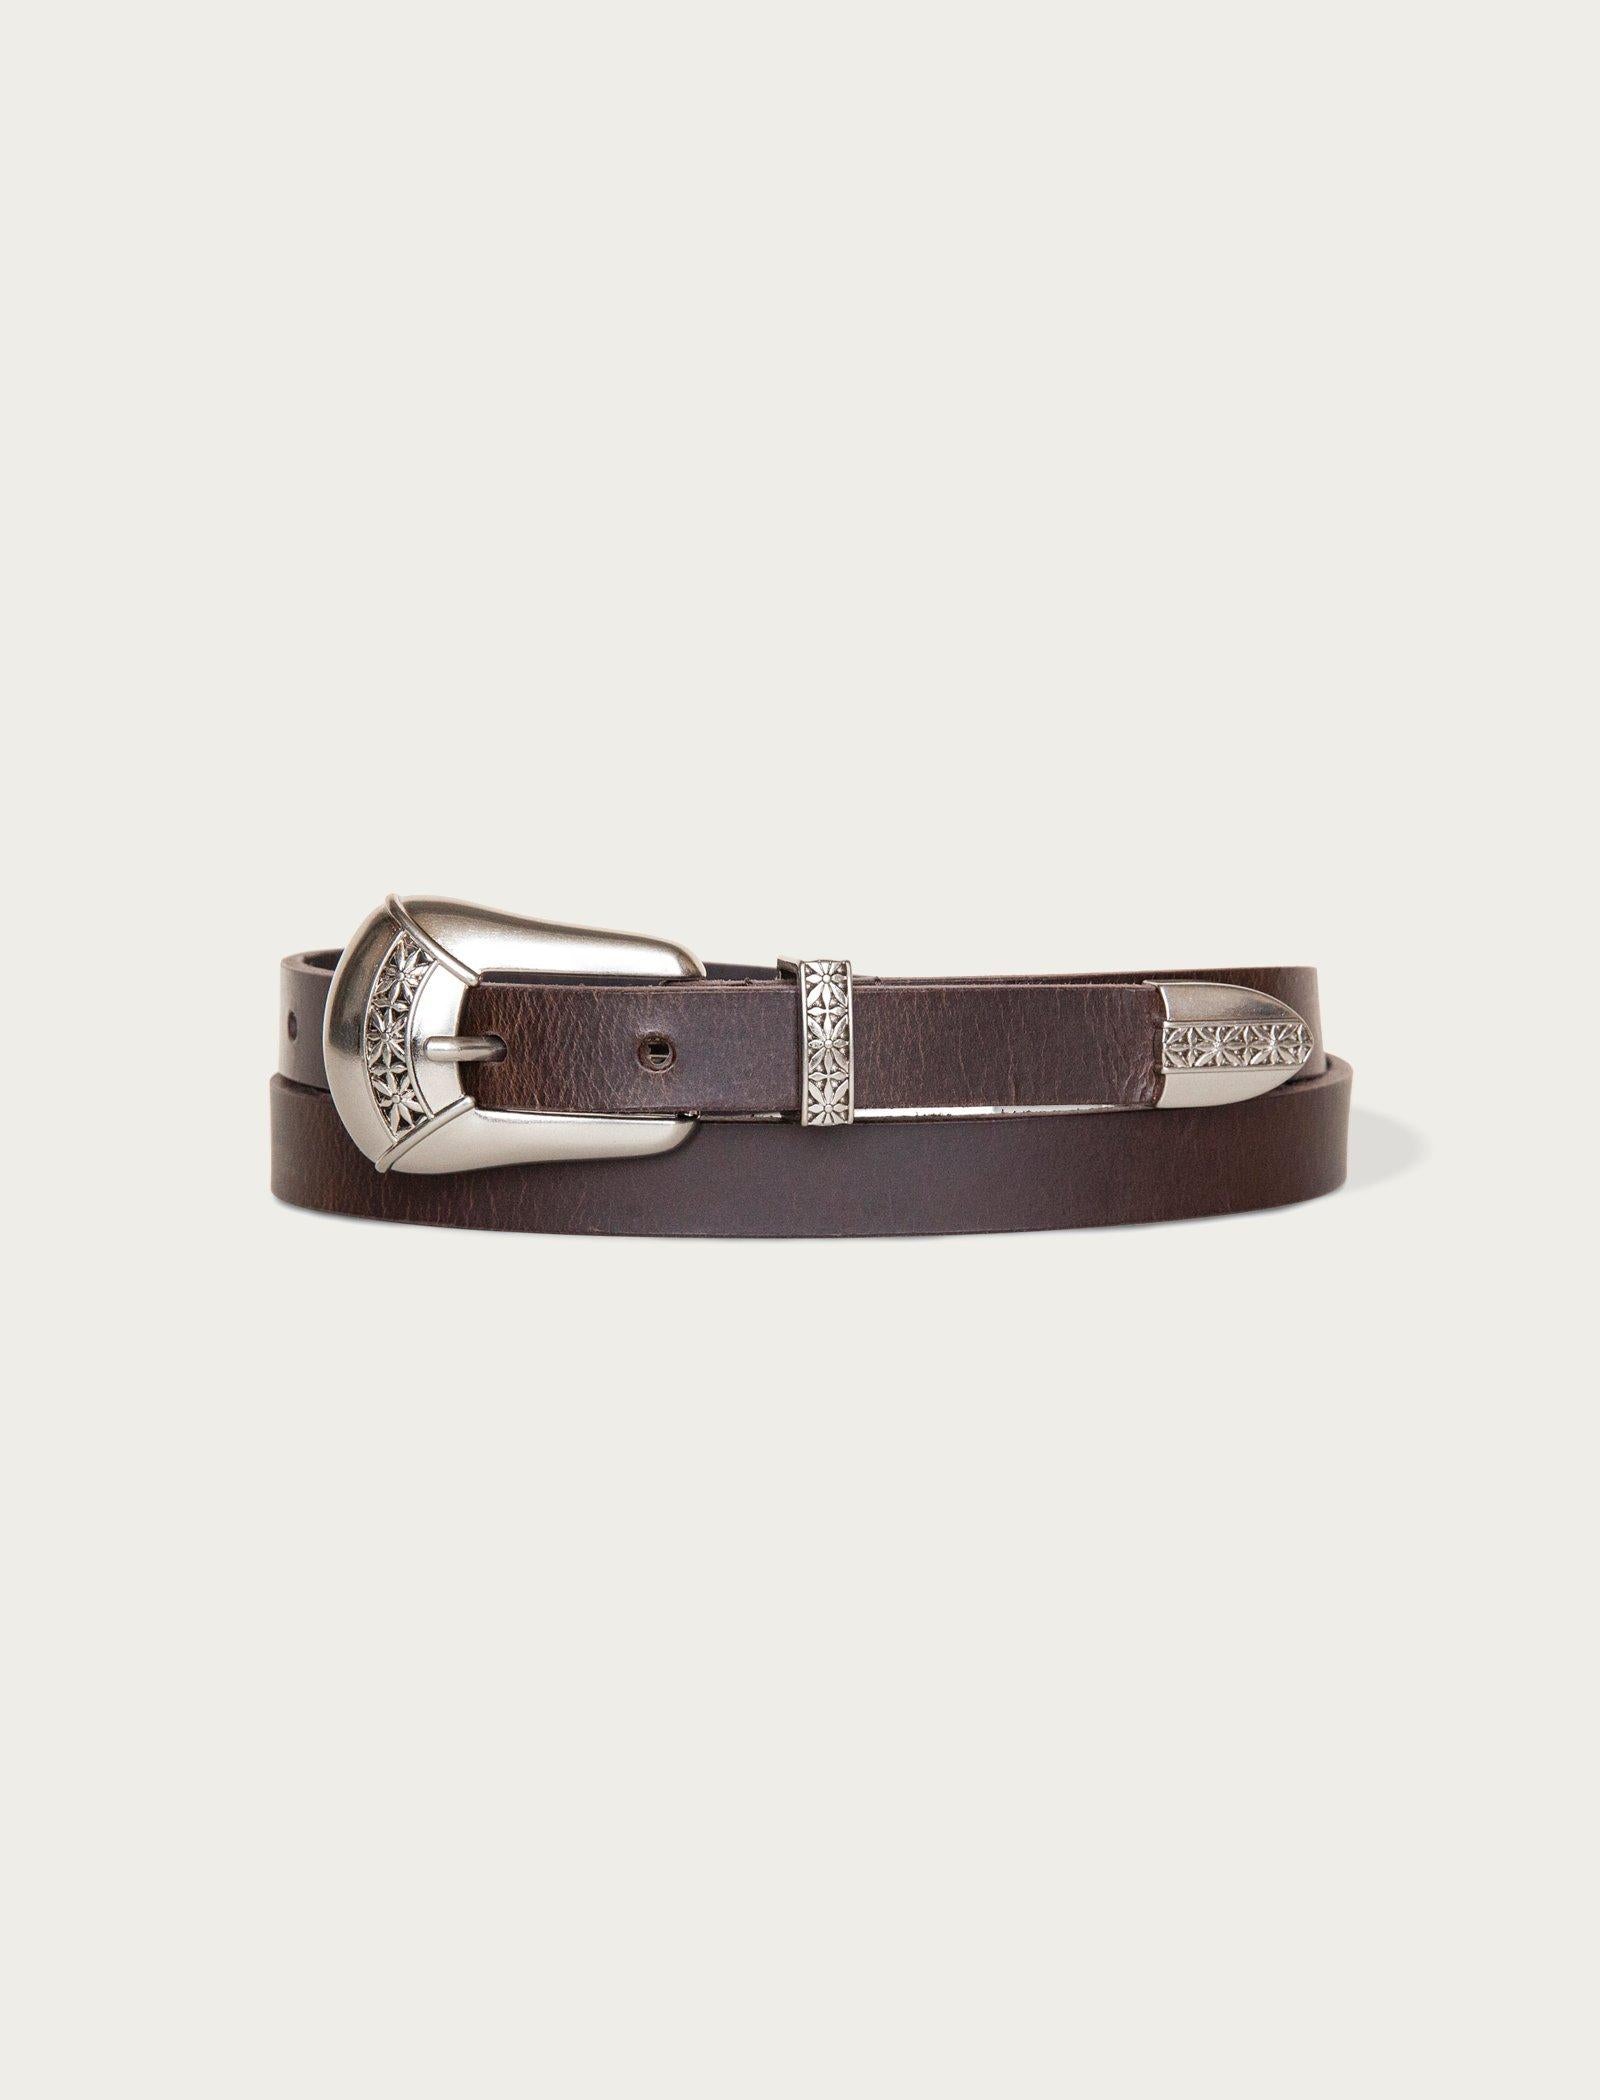 Lucky Brand Leather Belt With Western Buckle Set Dark Brown